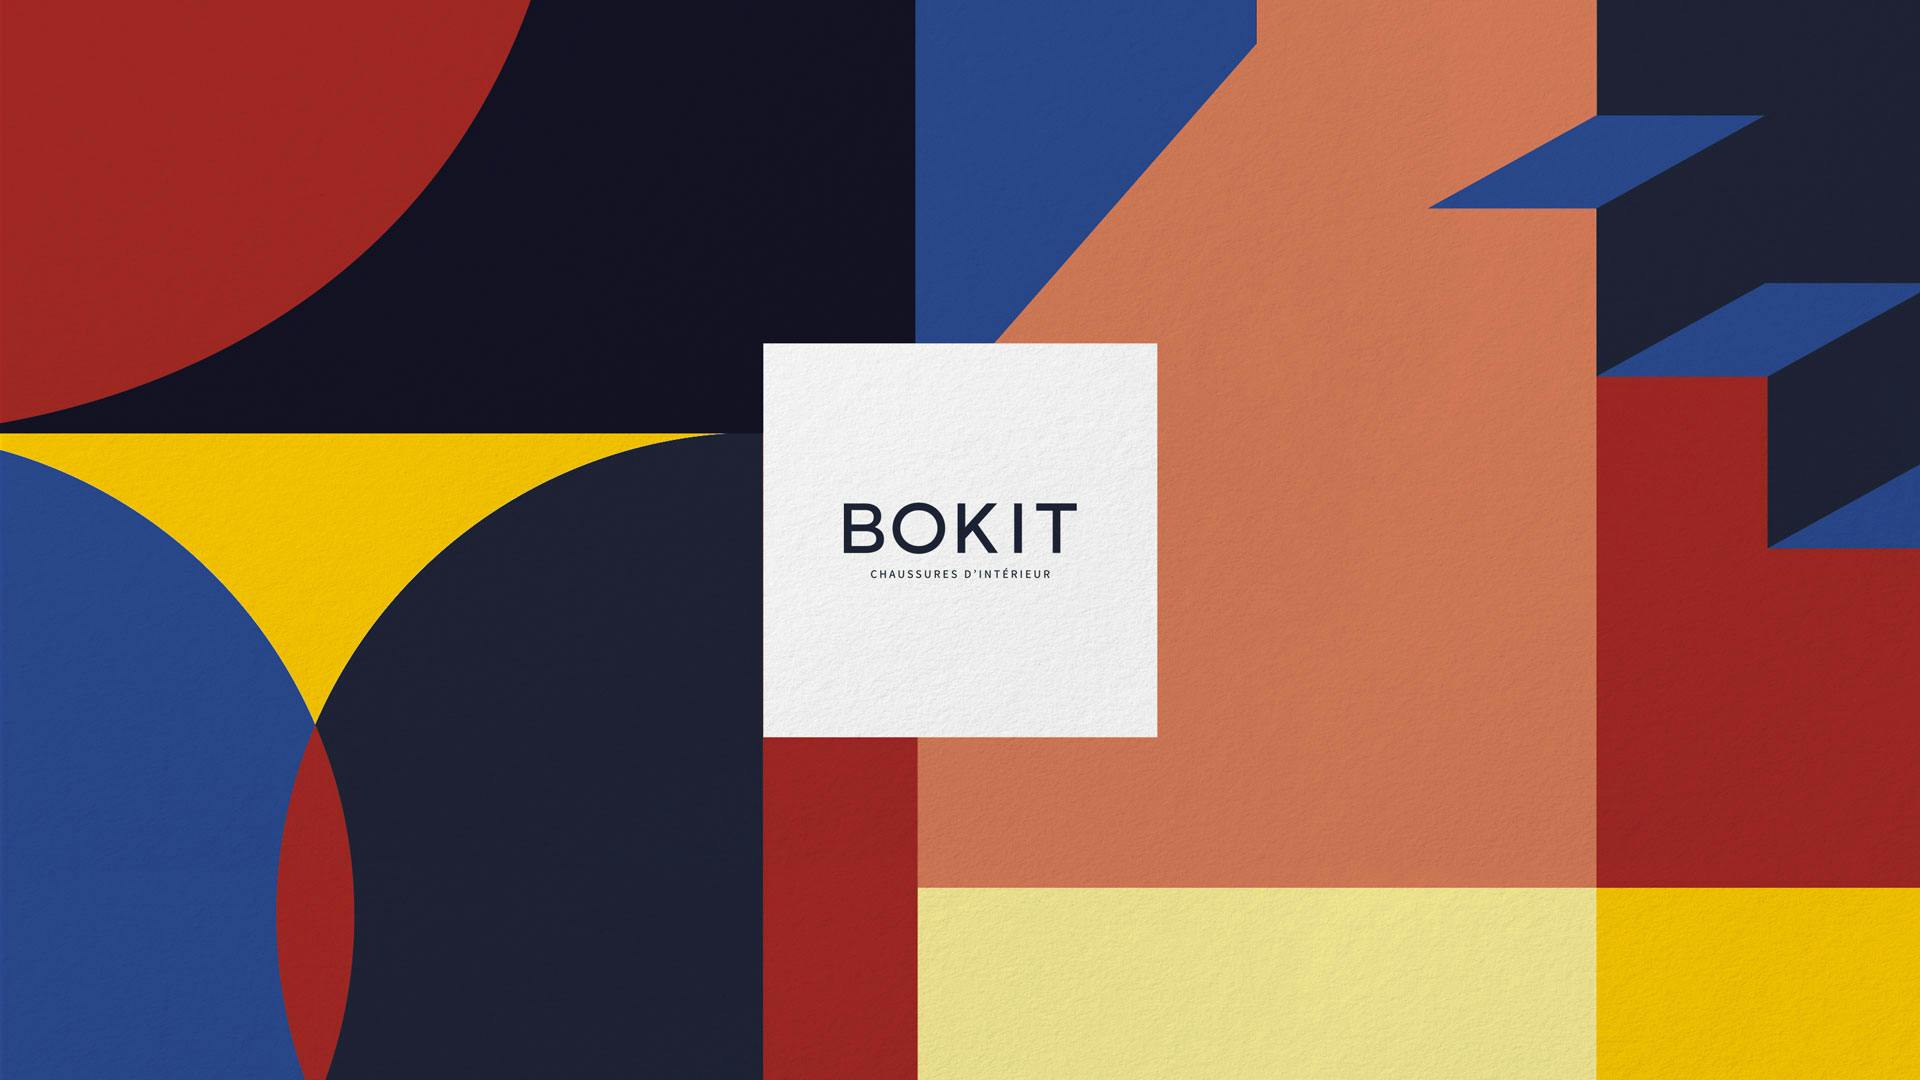 A new geometric and colorful branding for interior shoes brand Bokit